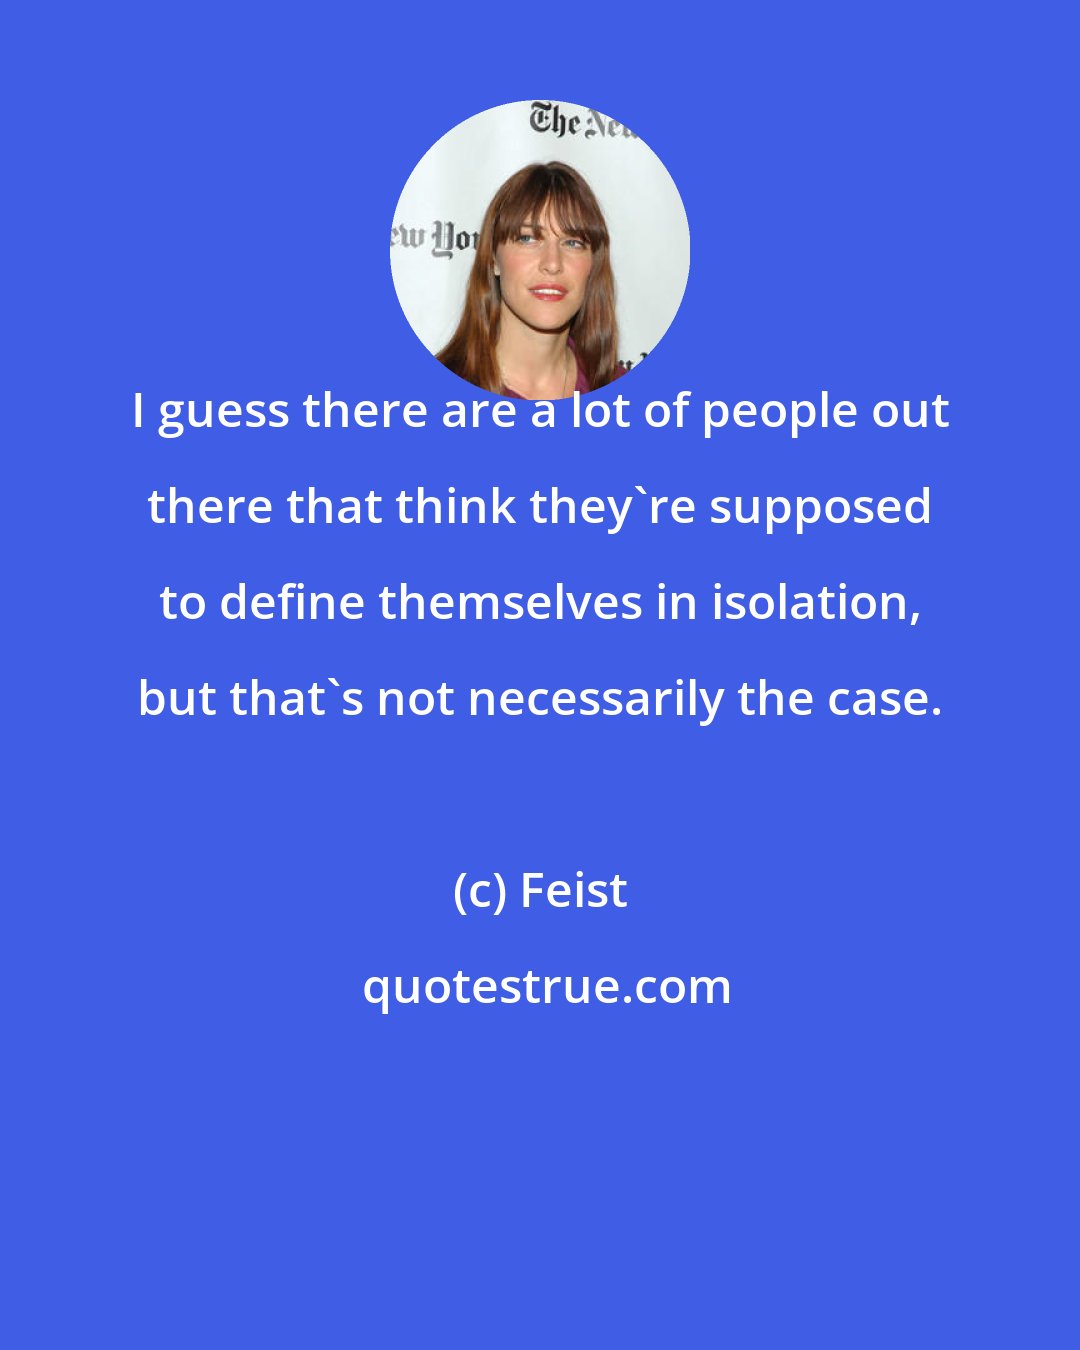 Feist: I guess there are a lot of people out there that think they're supposed to define themselves in isolation, but that's not necessarily the case.